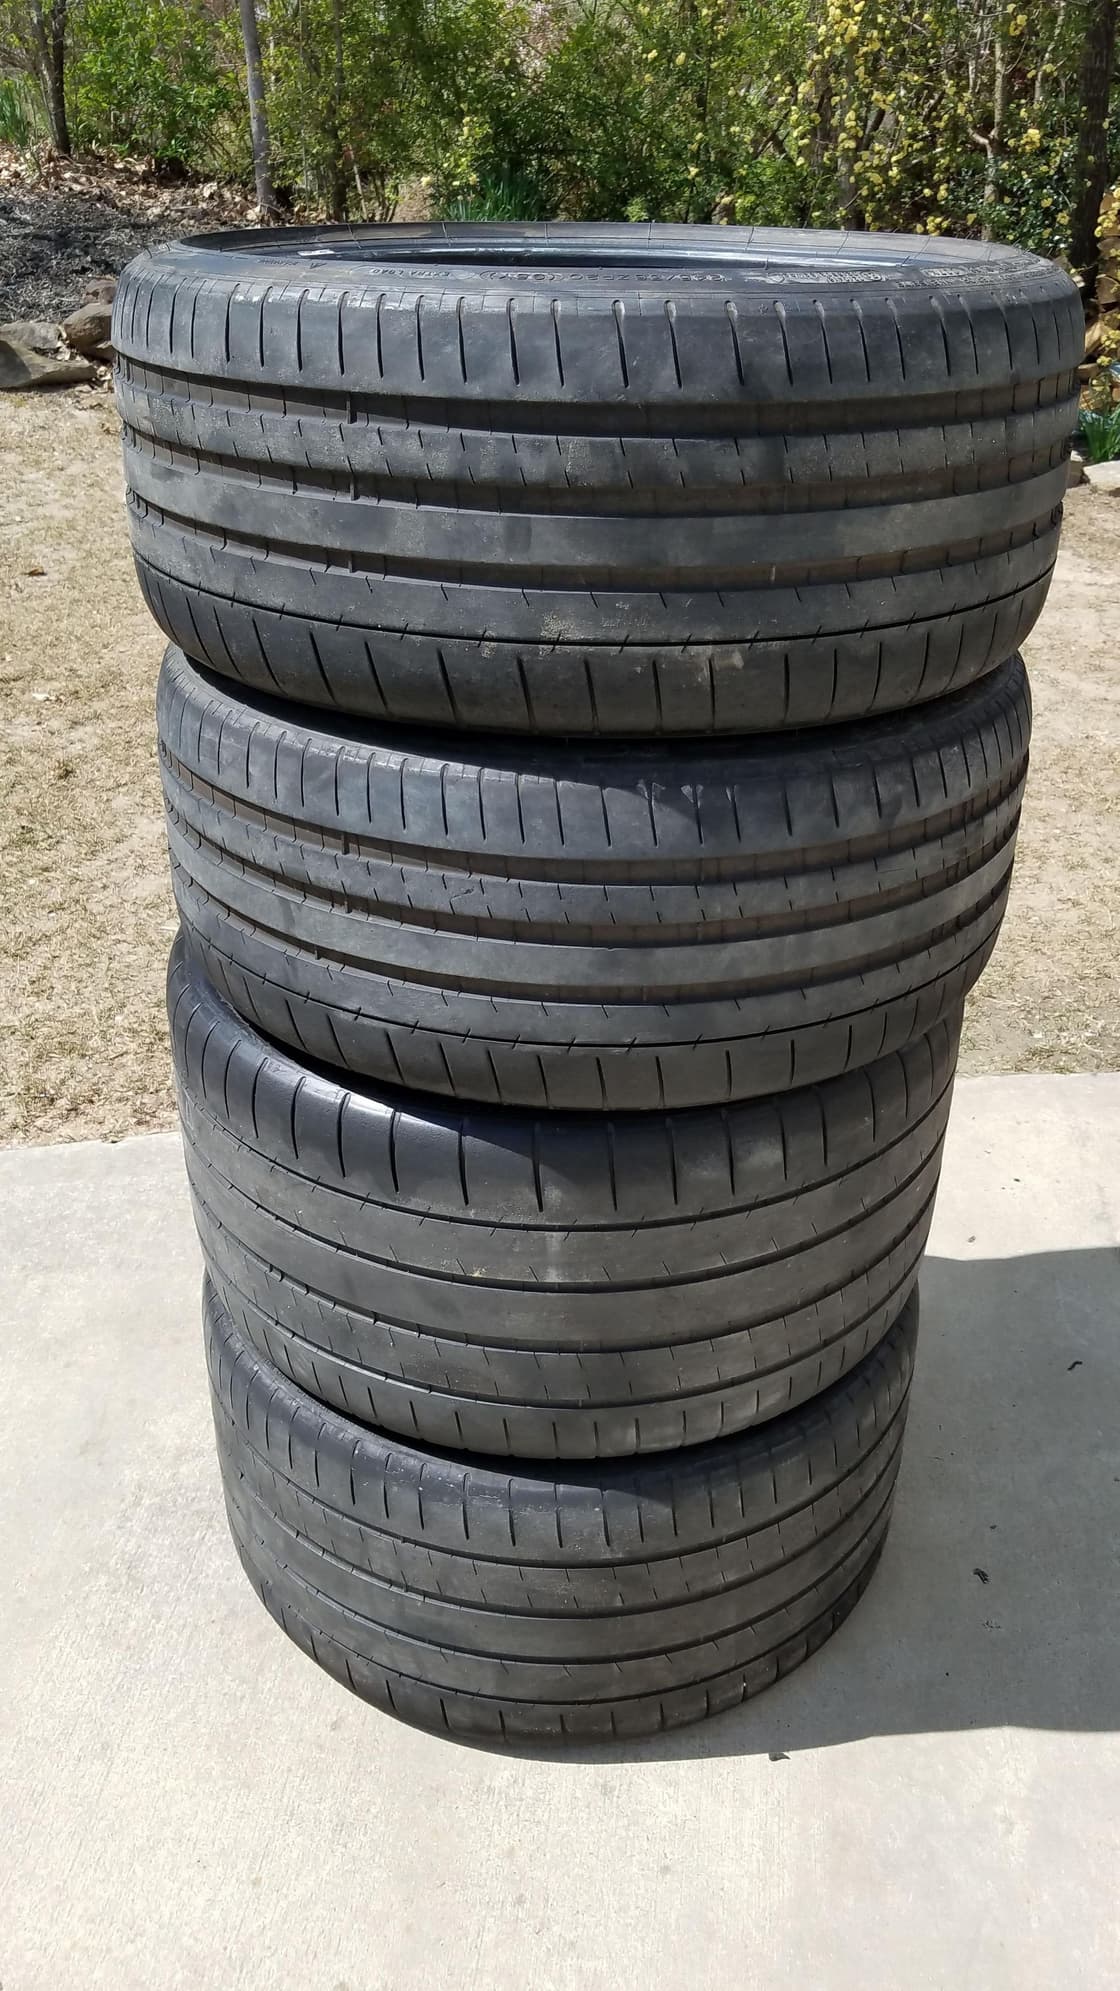 Wheels and Tires/Axles - 991.2 GT3 centerlock tools, wheels, tires and more for sale or trade - Used - 2018 to 2019 Porsche 911 - Buford, GA 30519, United States